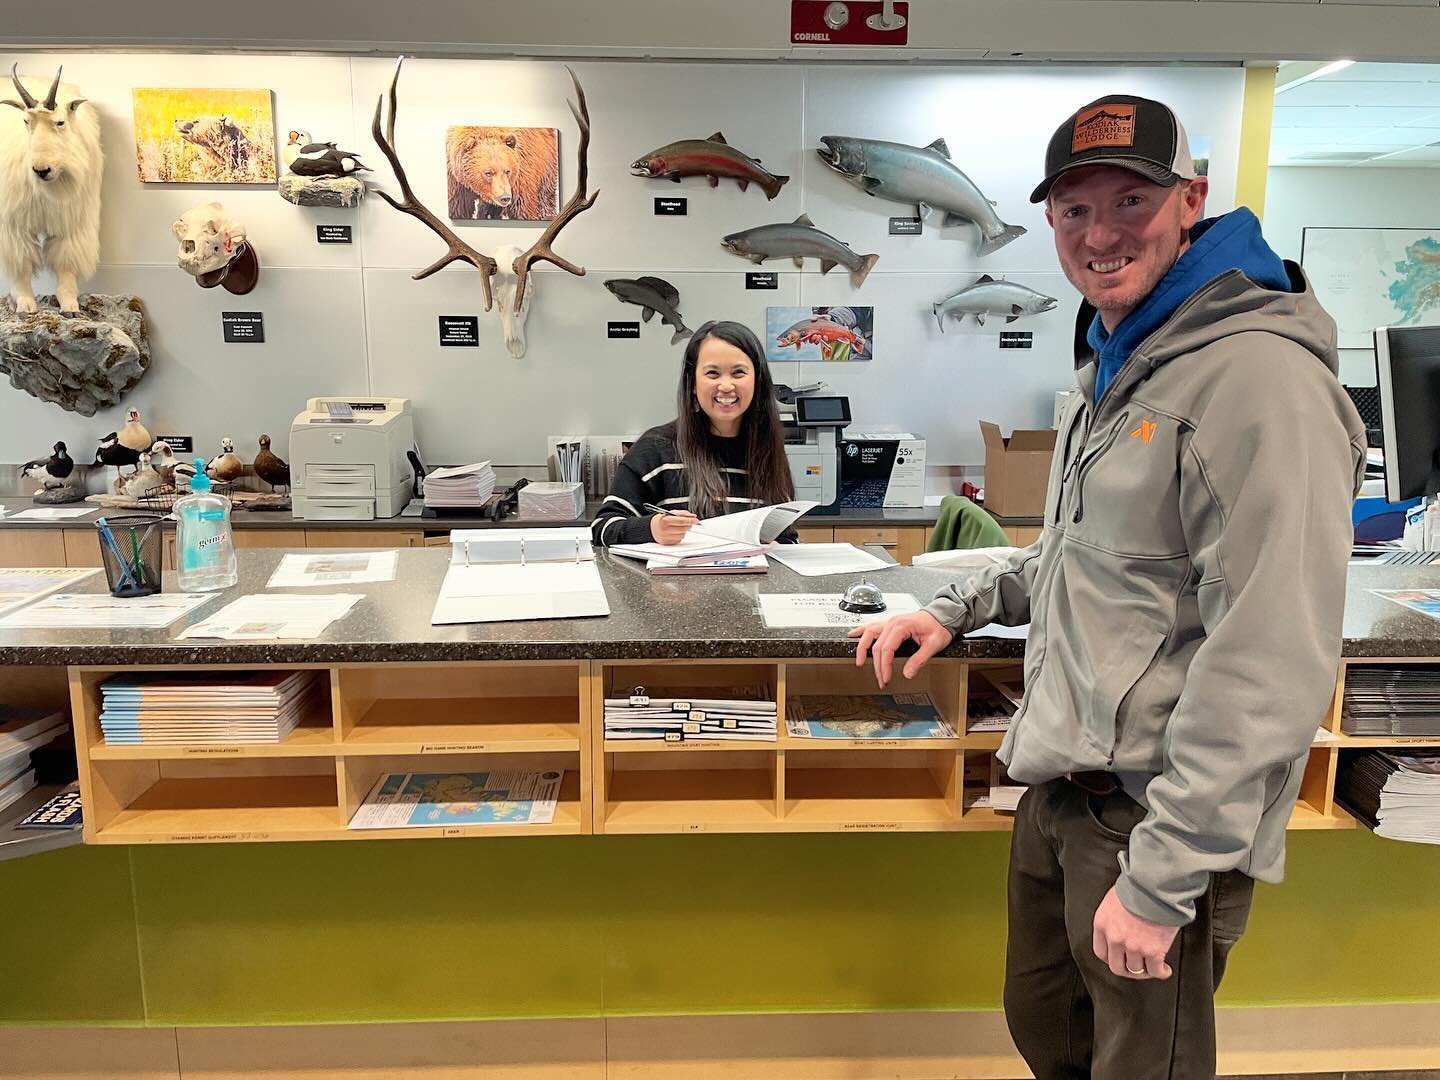 Picking up the saltwater charter logbooks at Fish &amp; Game this morning. Thanks for your help, Katrina! 

#charterfishing #saltwaterfishing #alaskaoutdoors